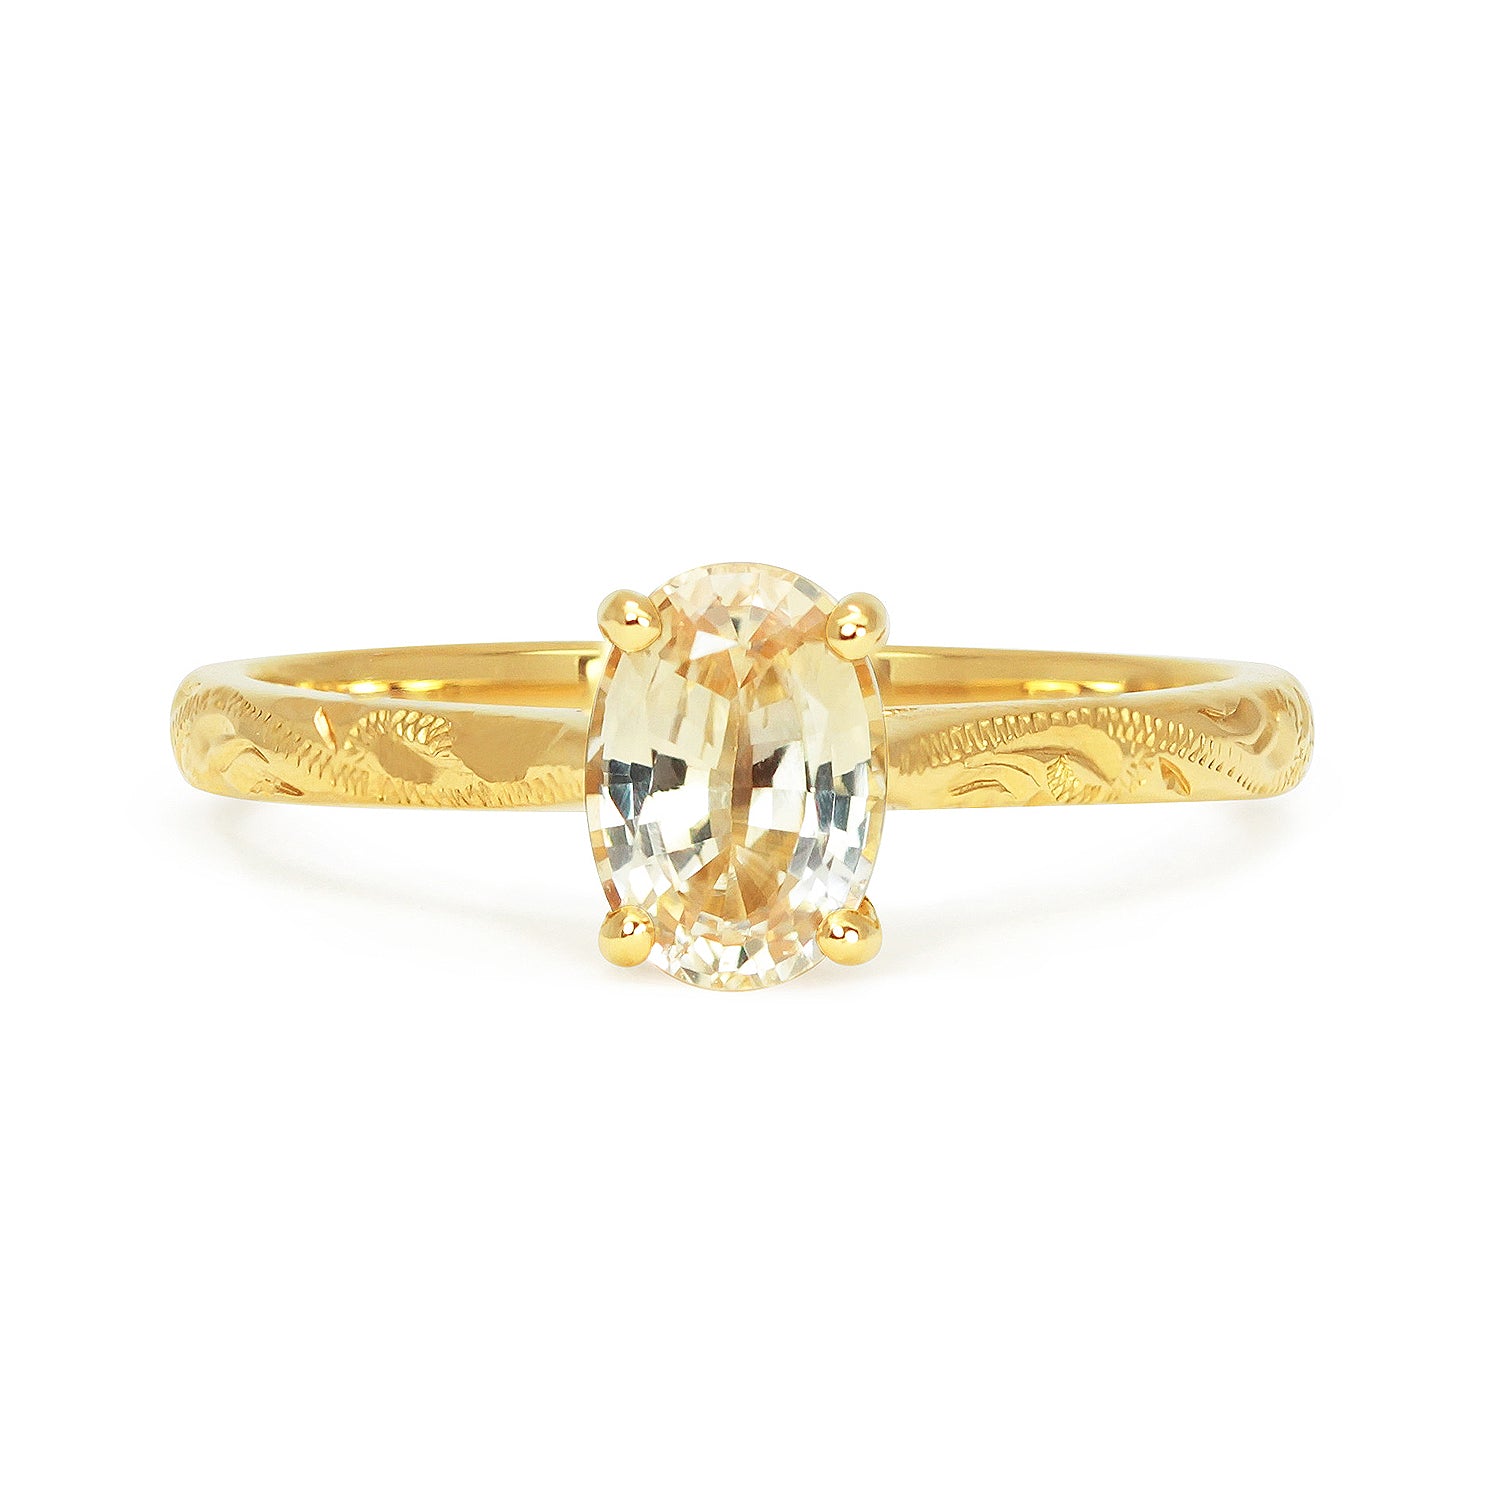 Fancy Athena Champagne Sapphire Ethical Gold Engagement Ring, recycled gold and a fair-traded Sri Lankan sapphire